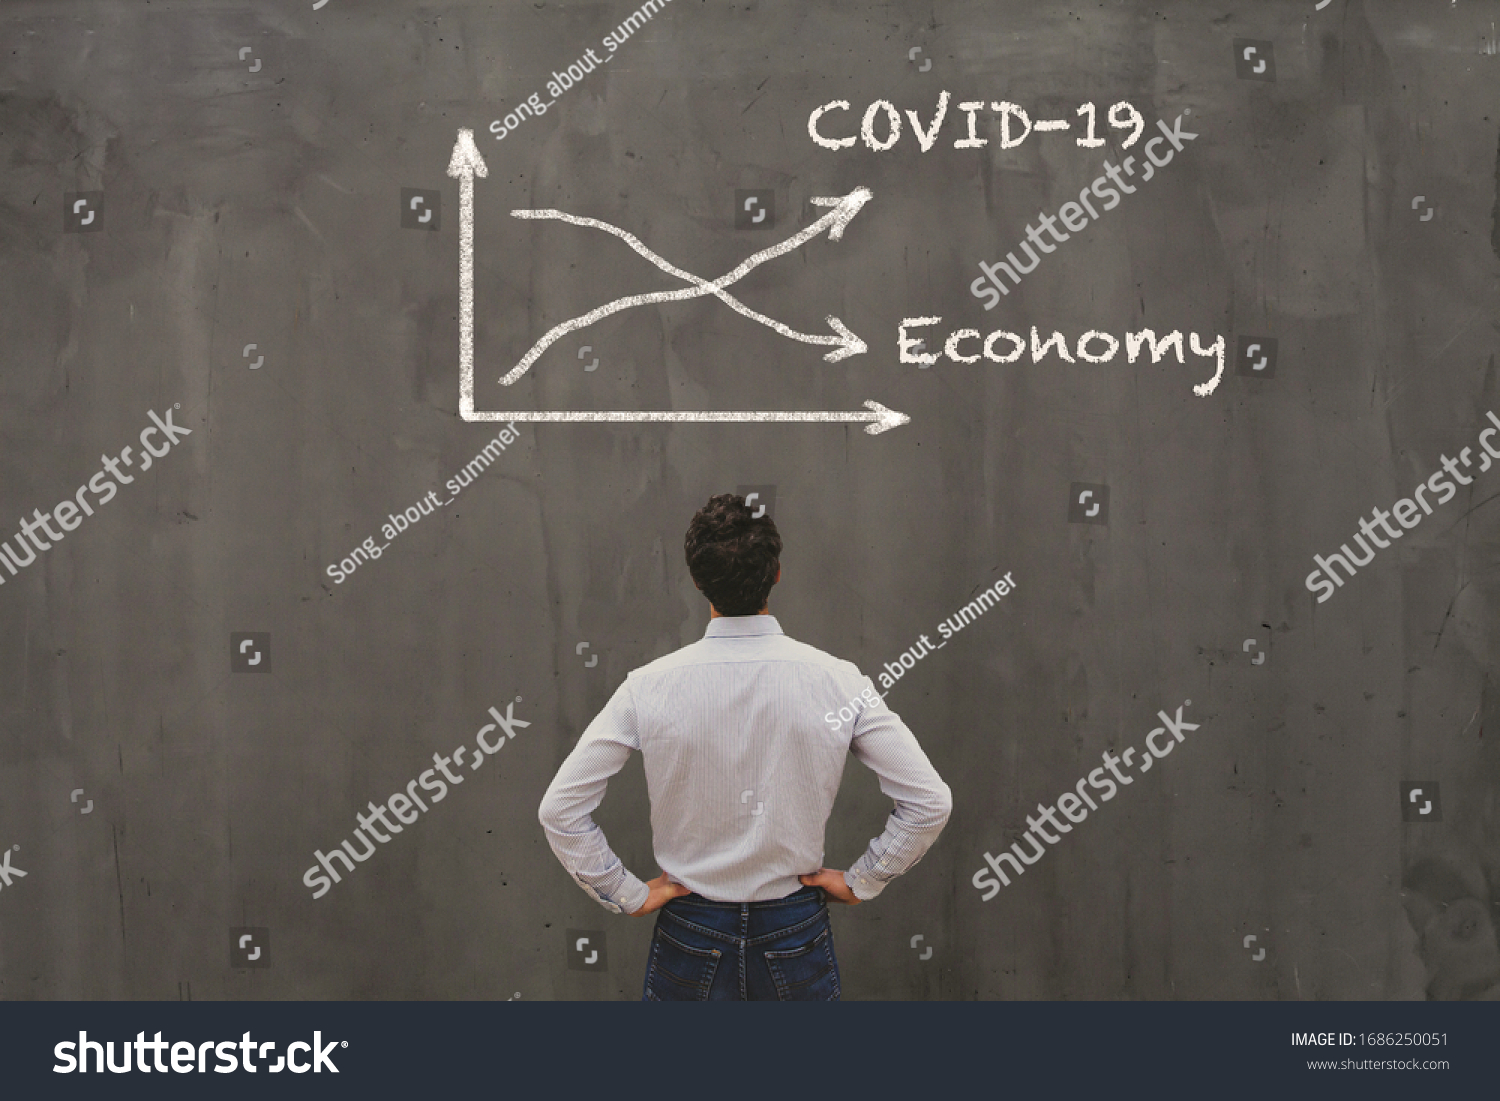 econimical crisis concept due to coronavirus COVID-19 spread in the world, virus curve up, economy down #1686250051